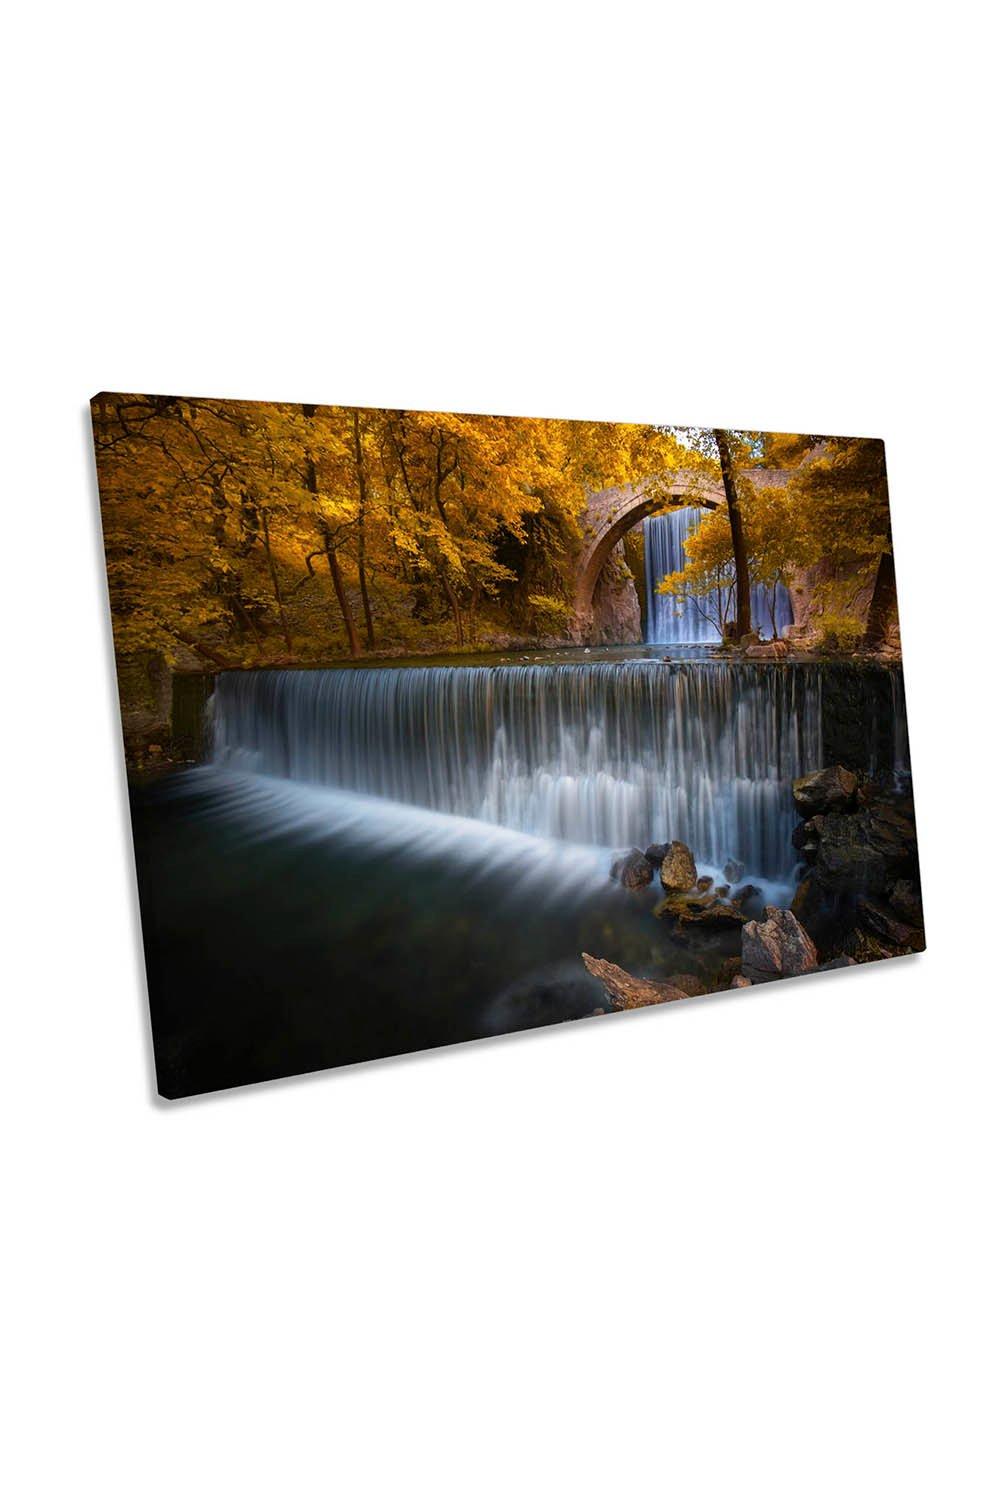 Autumn Water Fall River Forest Orange Canvas Wall Art Picture Print